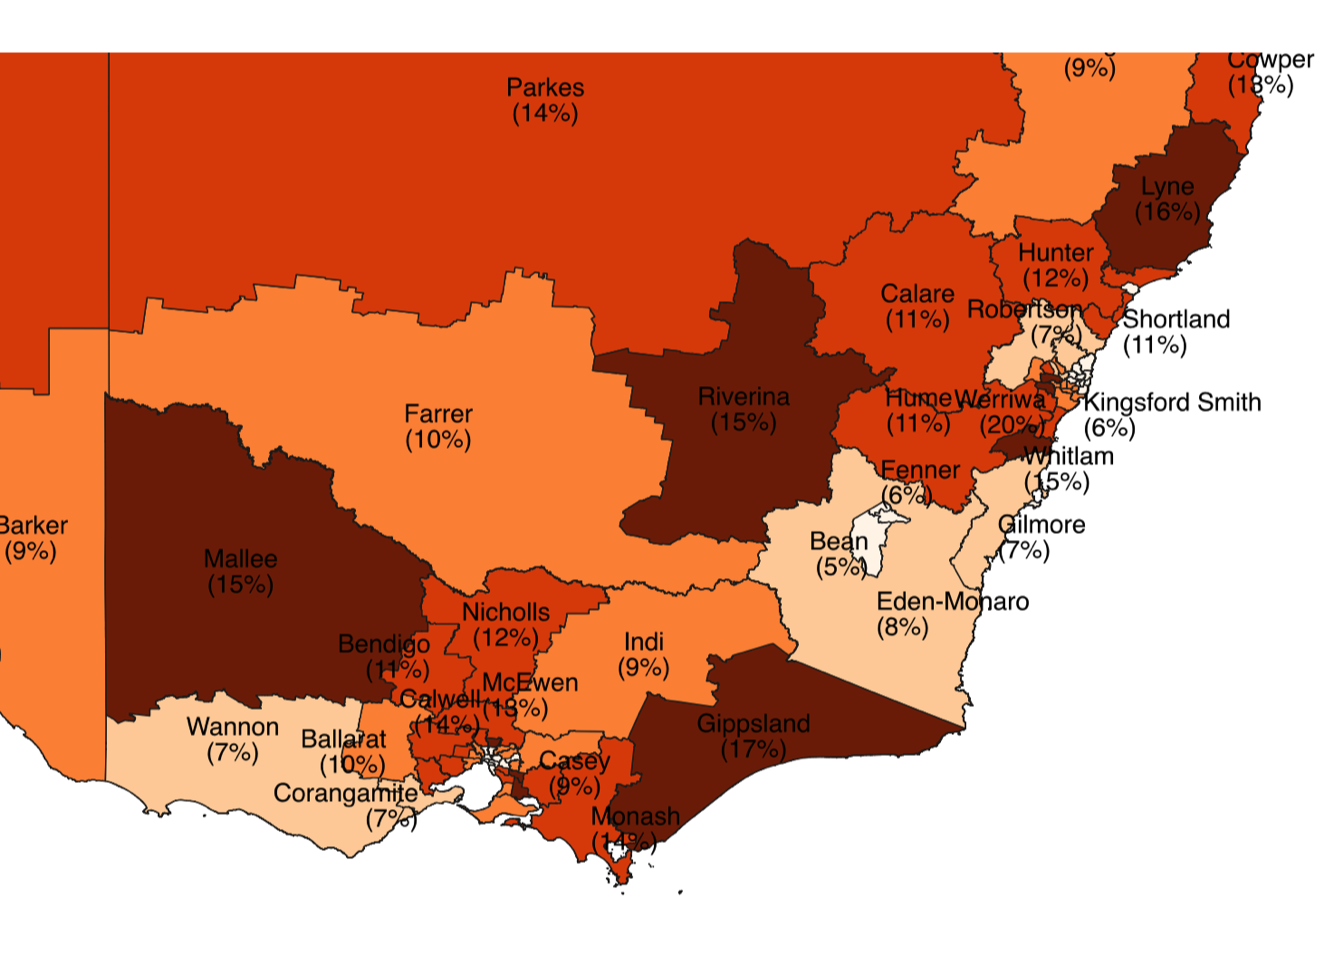 F2. Vote (%) for Freedom Friendly Minor Parties in South-East Australia by Electorate